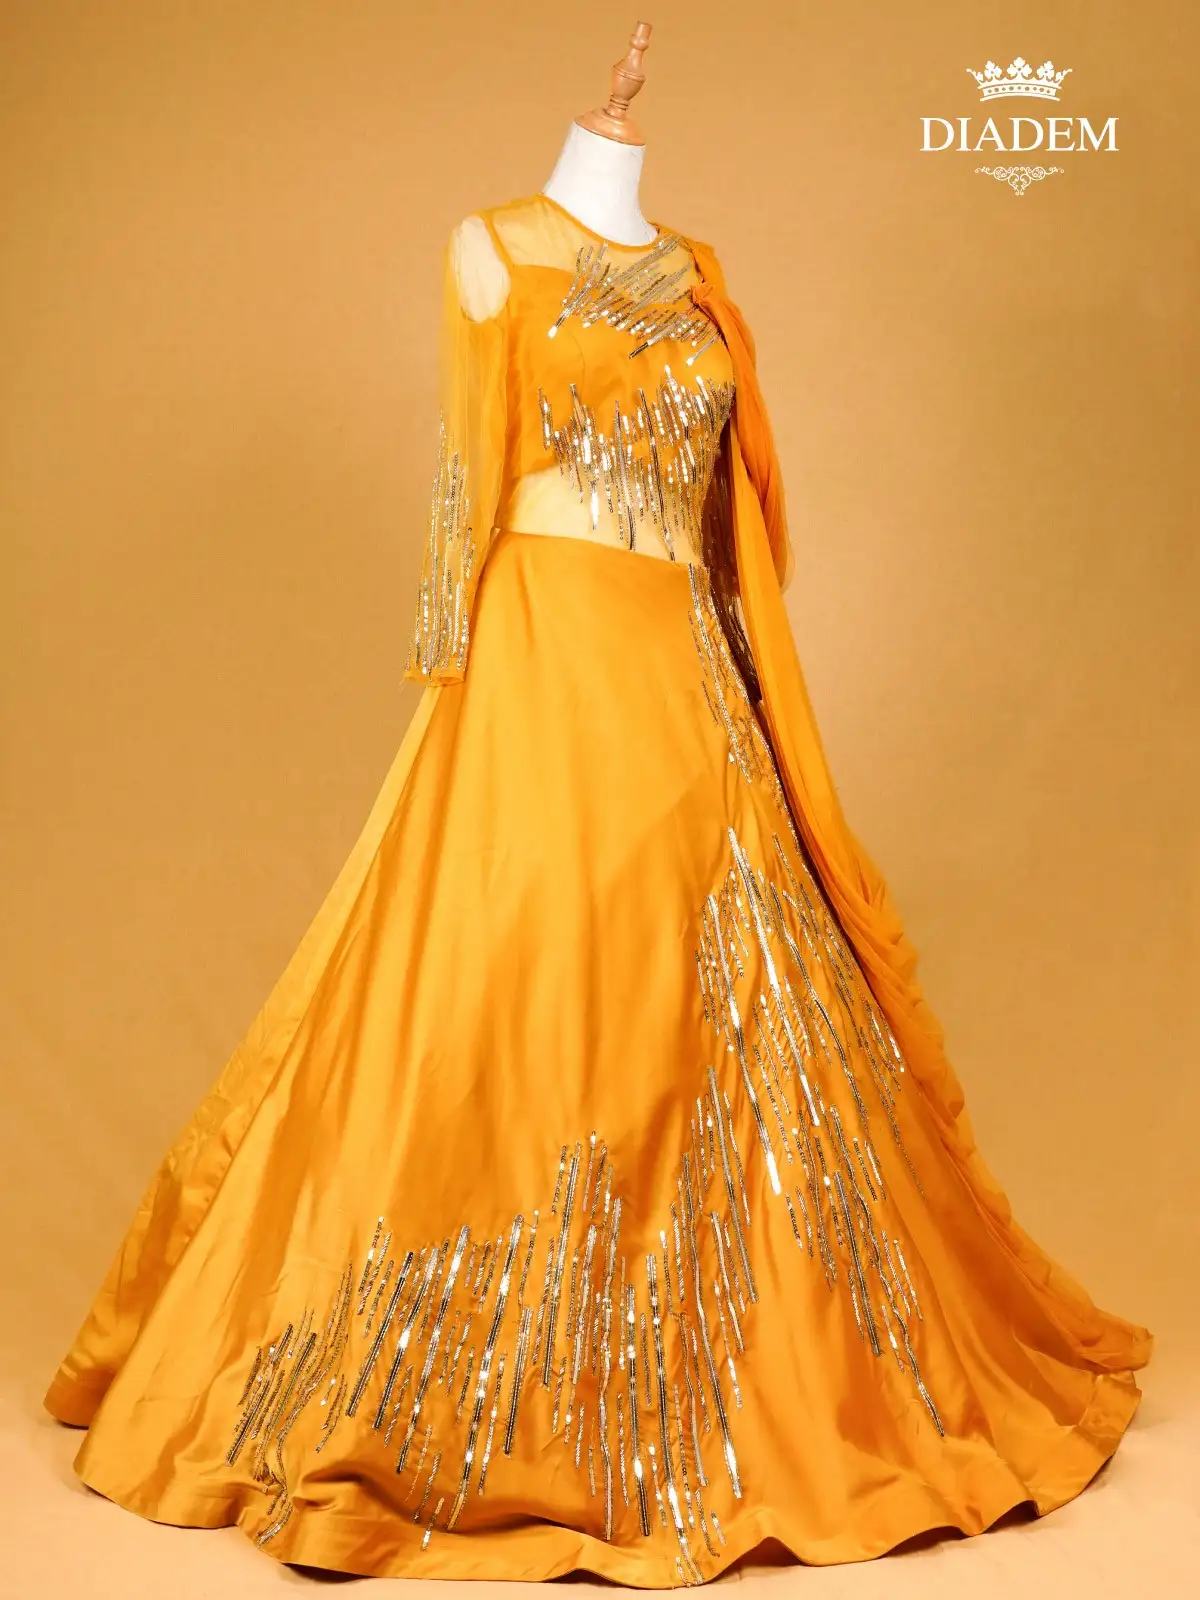 Chrome Yellow Gown Enhanced With Sequins